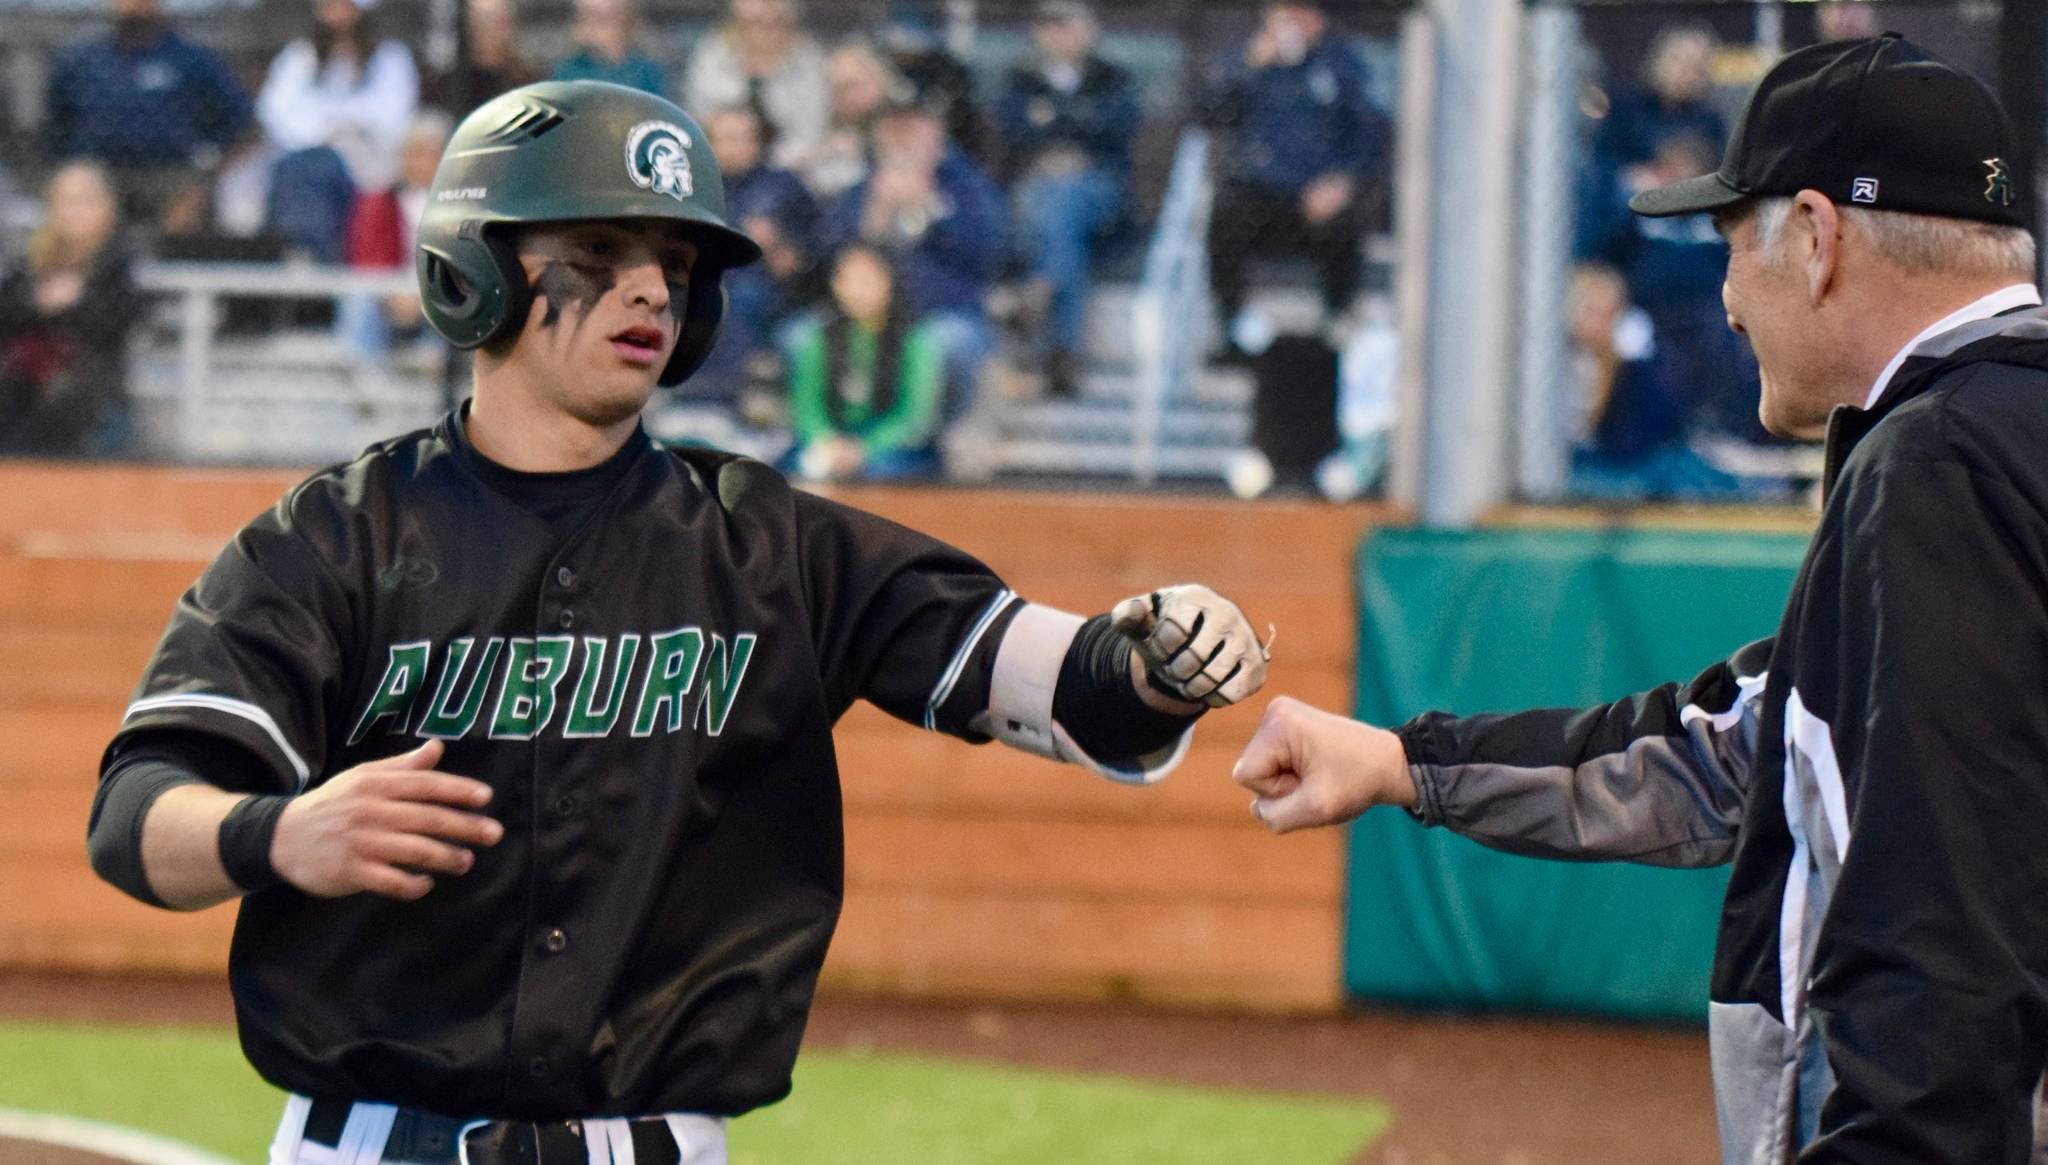 Auburn’s Cameron Antee bumps fists with coach Gordon Elliott after launching a solo home run in the second inning of Monday night’s NPSL game. RACHEL CIAMPI, Auburn Reporter